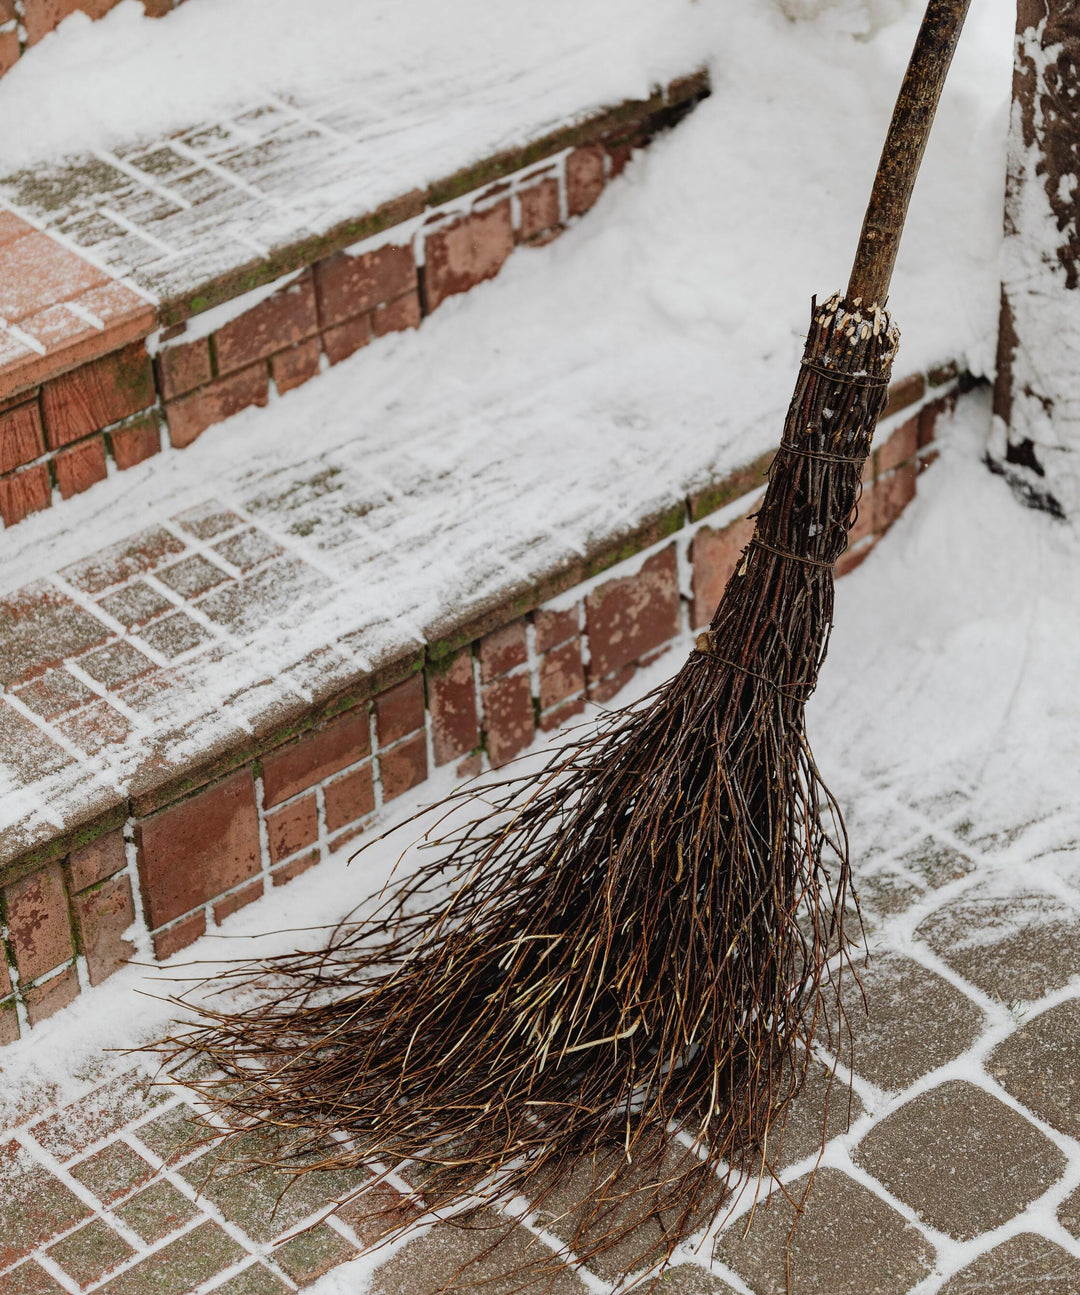 What Is a Cinnamon Broom? History, Uses, and How To Make One Yourself